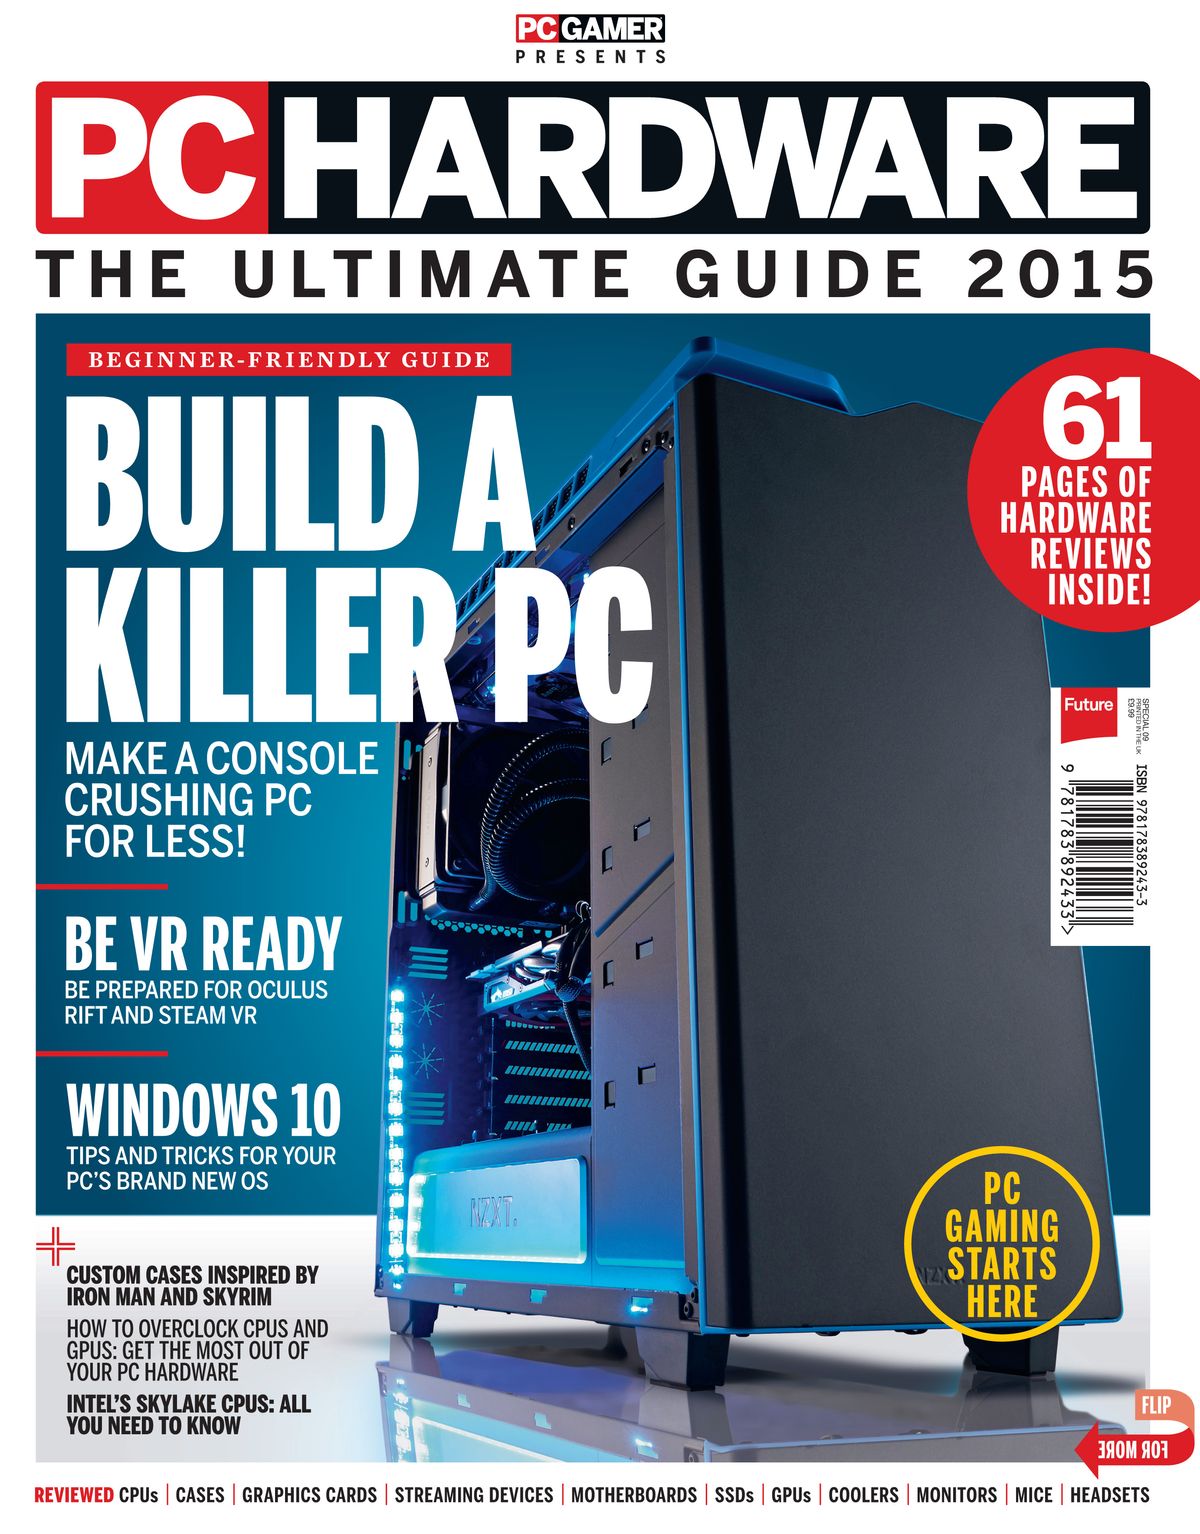 PC Gamer Presents PC Hardware: The Ultimate Guide 2015 is ... - 1200 x 1534 jpeg 265kB